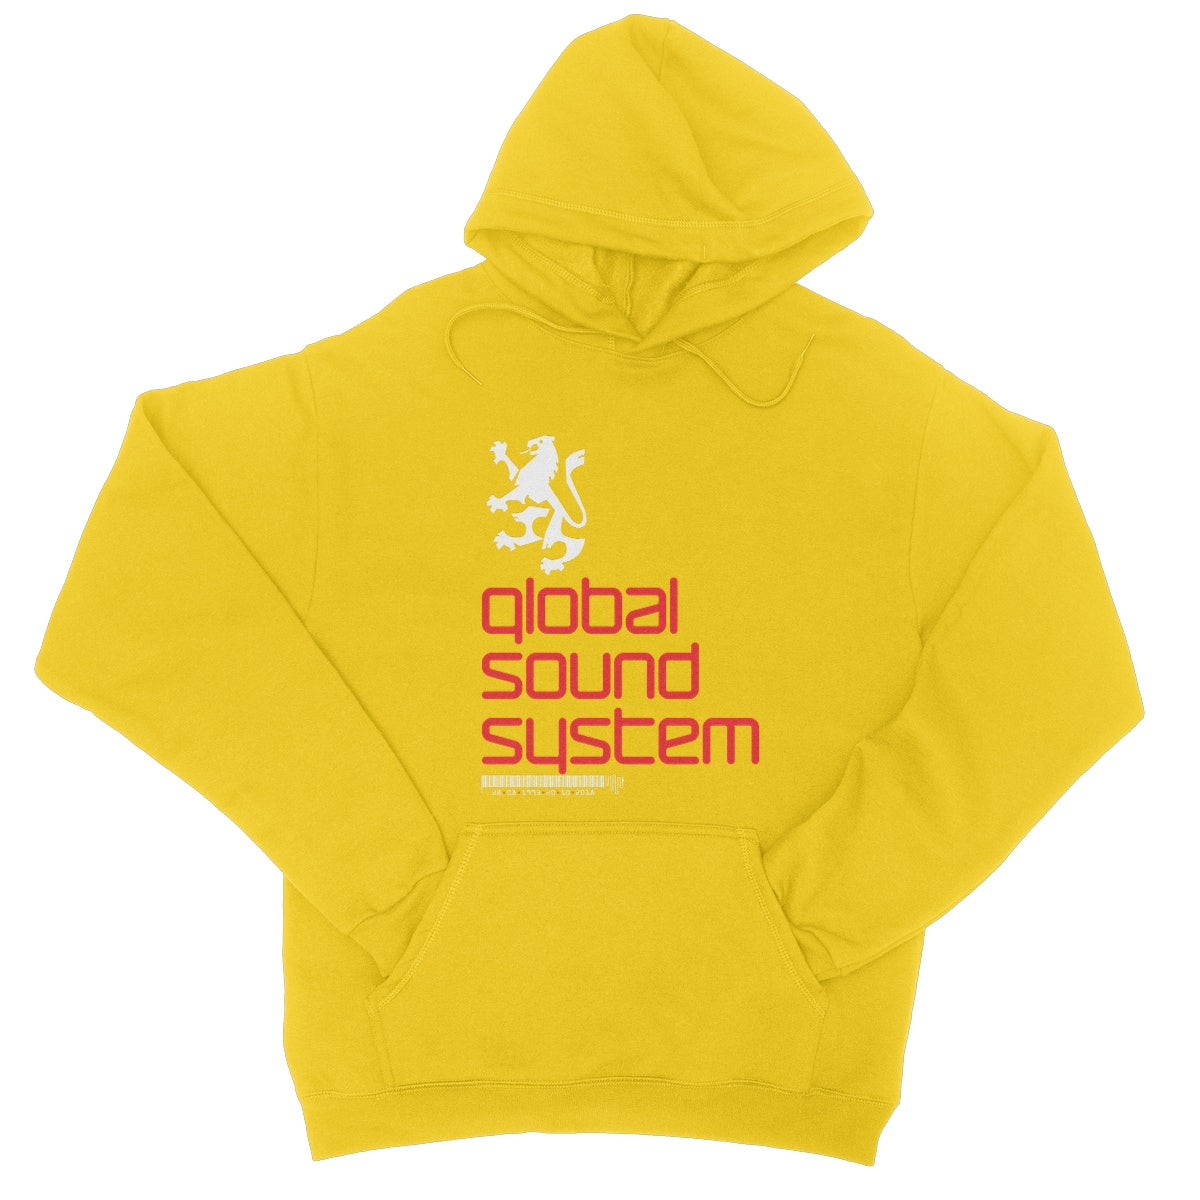 Global Sound System College Hoodie